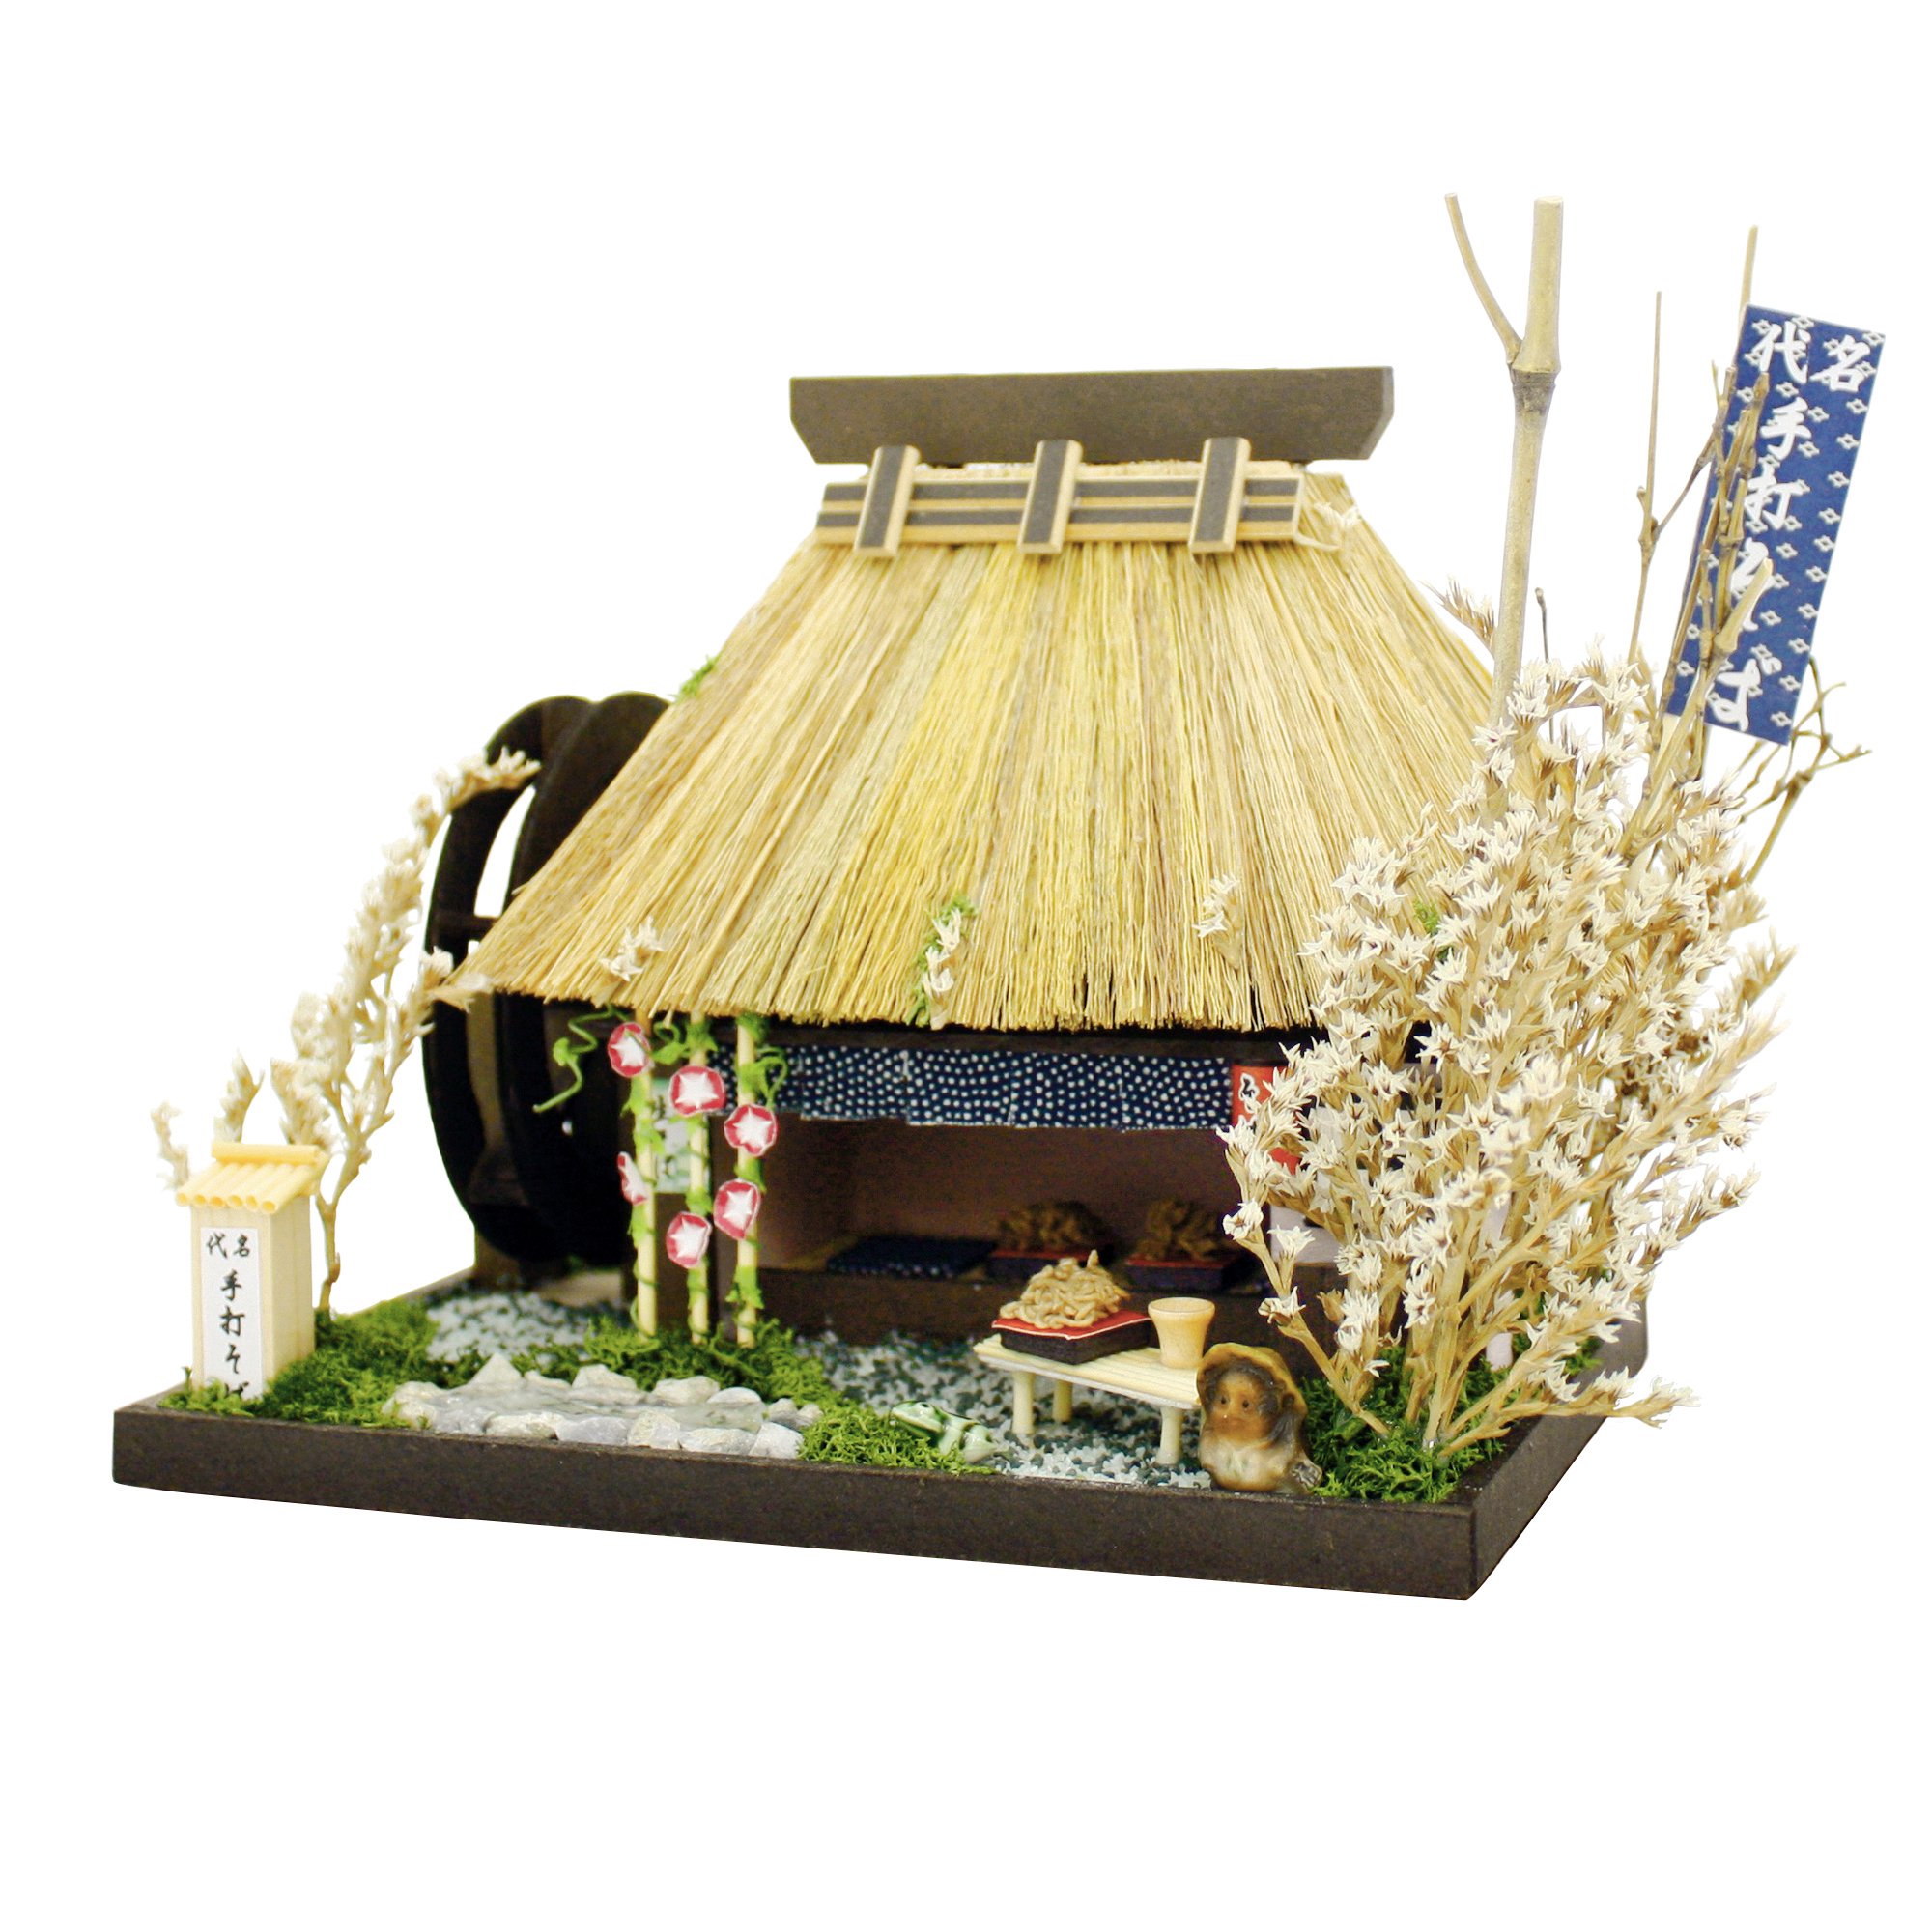 Billy handmade doll house kit Thatched House Kit noodle shop 8442 (japan import)